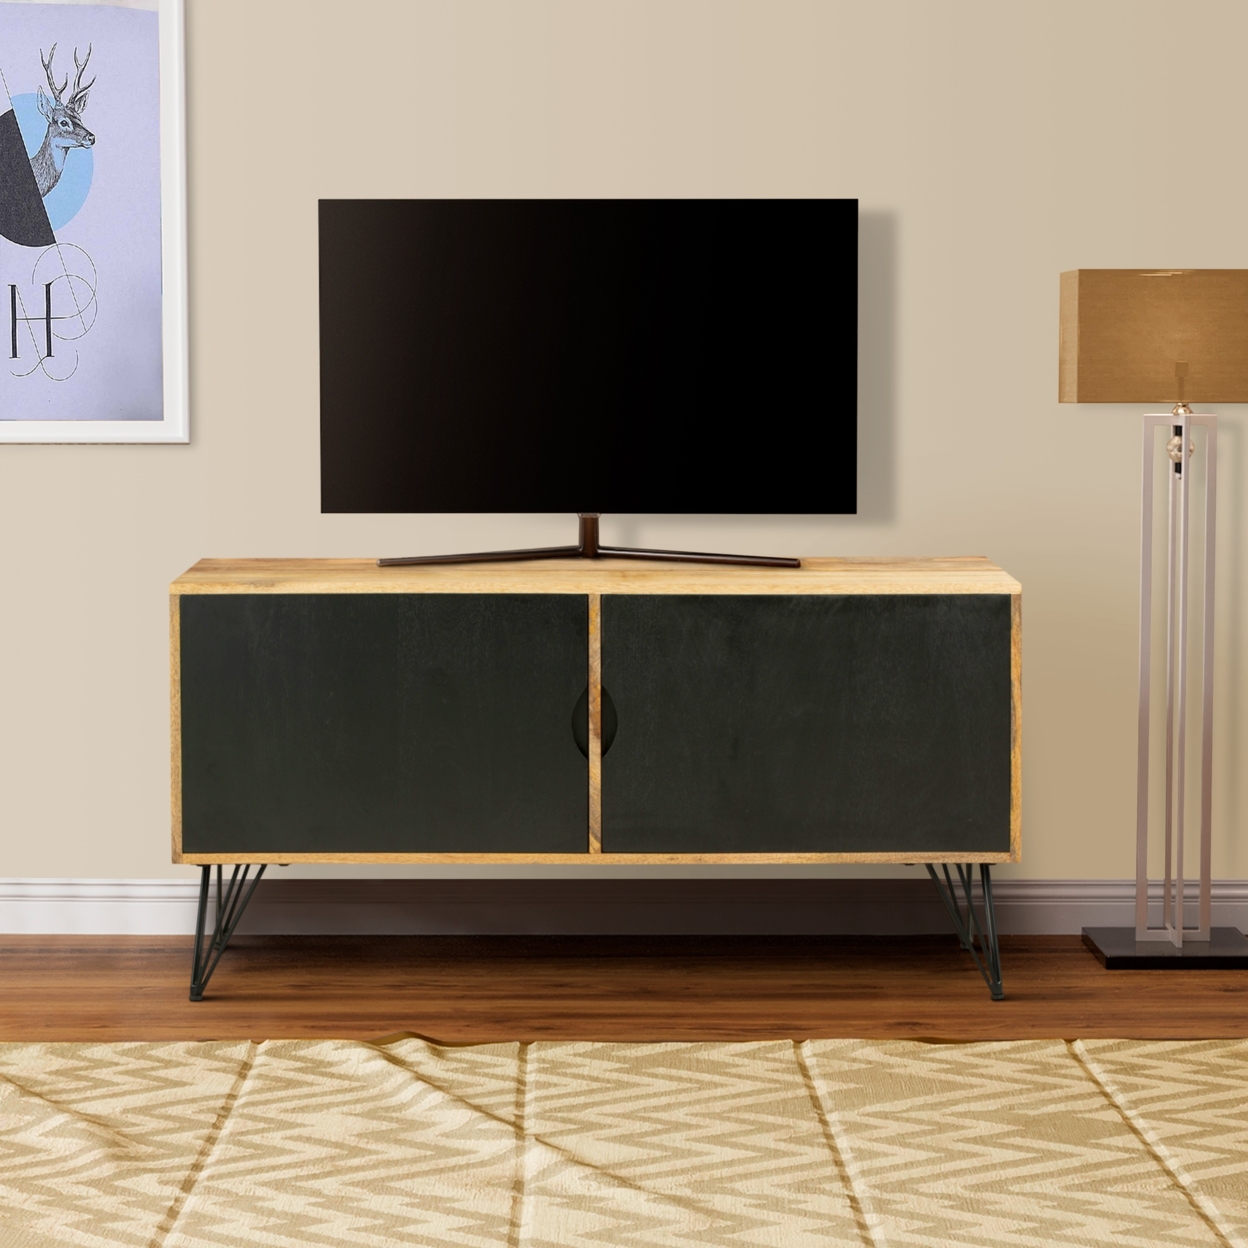 TV Entertainment Unit With 2 Doors And Wooden Frame, Oak Brown And Black- Saltoro Sherpi